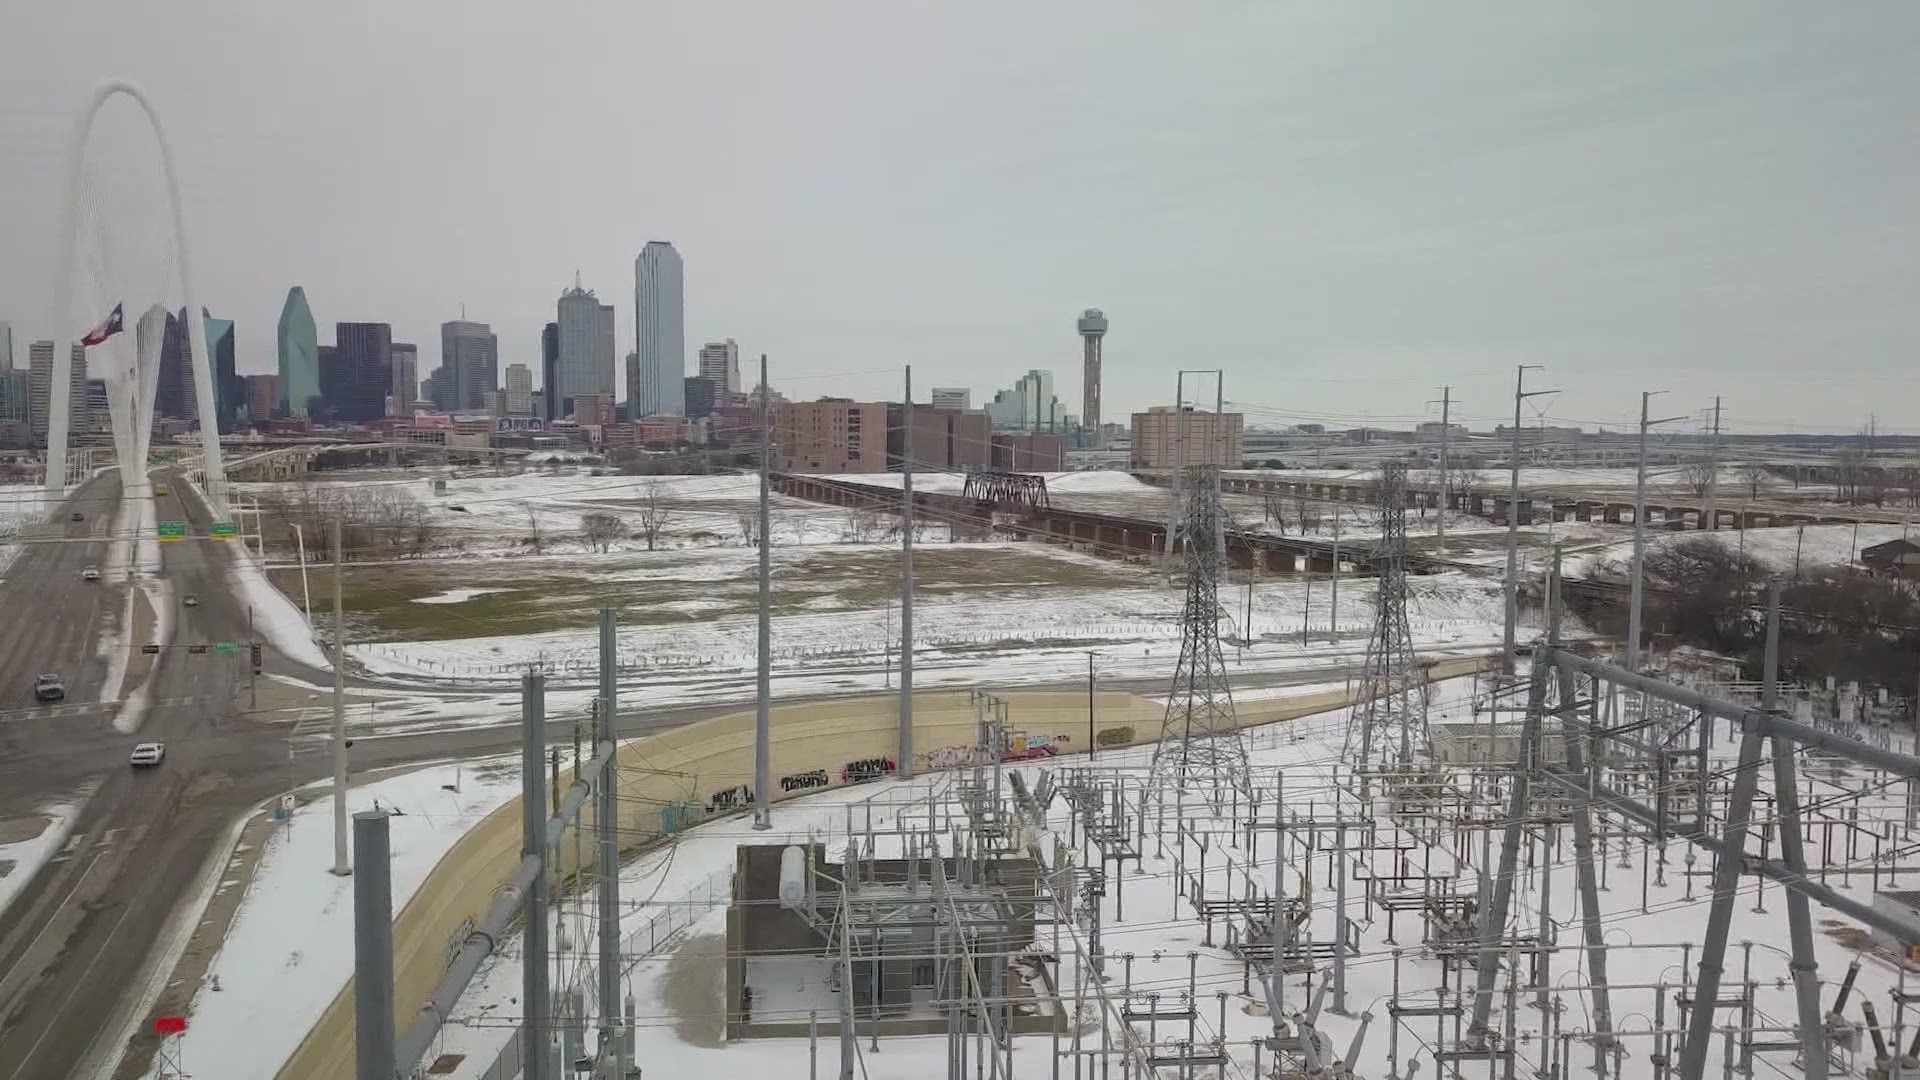 Oncor executives discussed the aftermath of the winter storm and power outages in an earnings call.